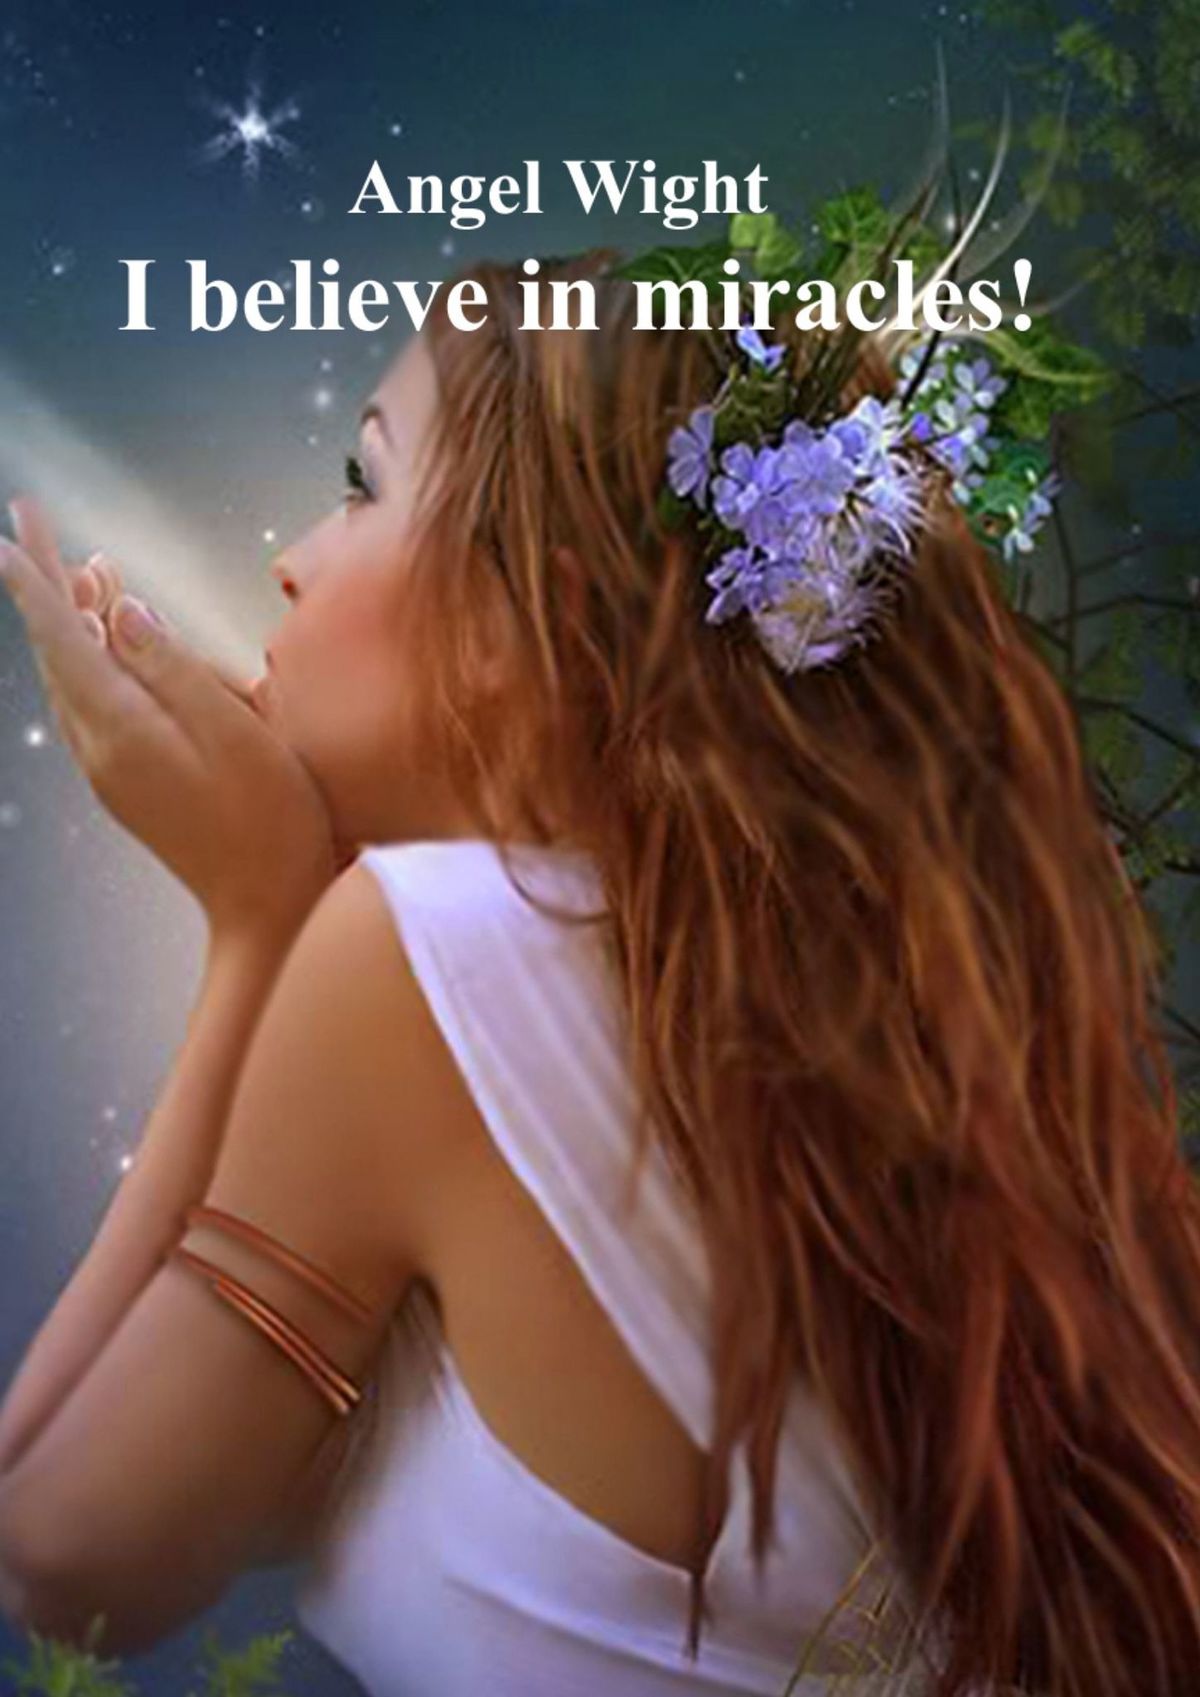 I believe in miracles!